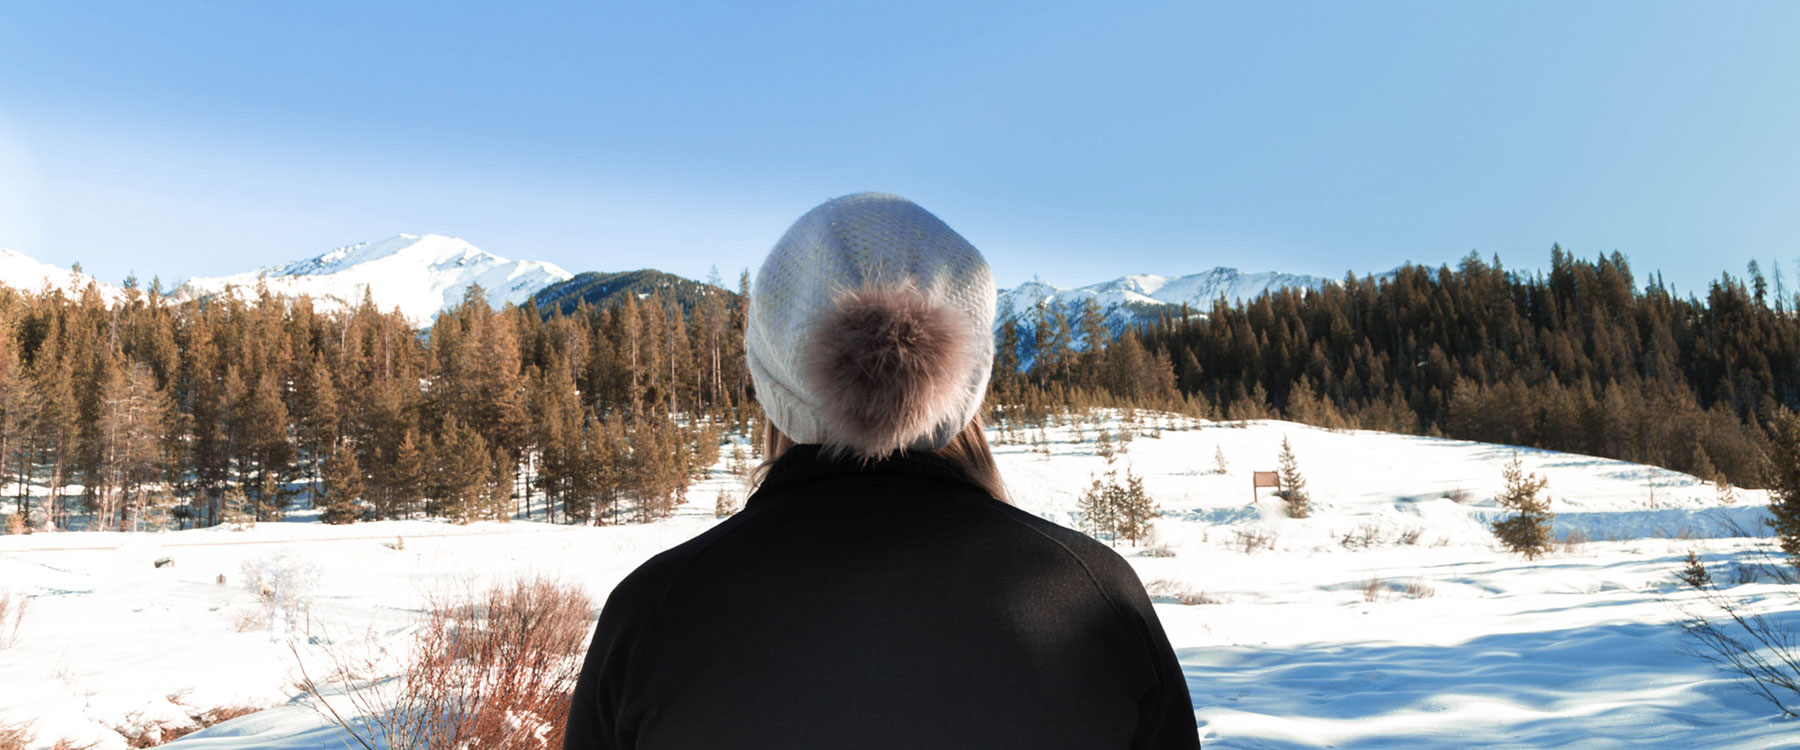 A person looks out at the scenery: a field of snow and trees.